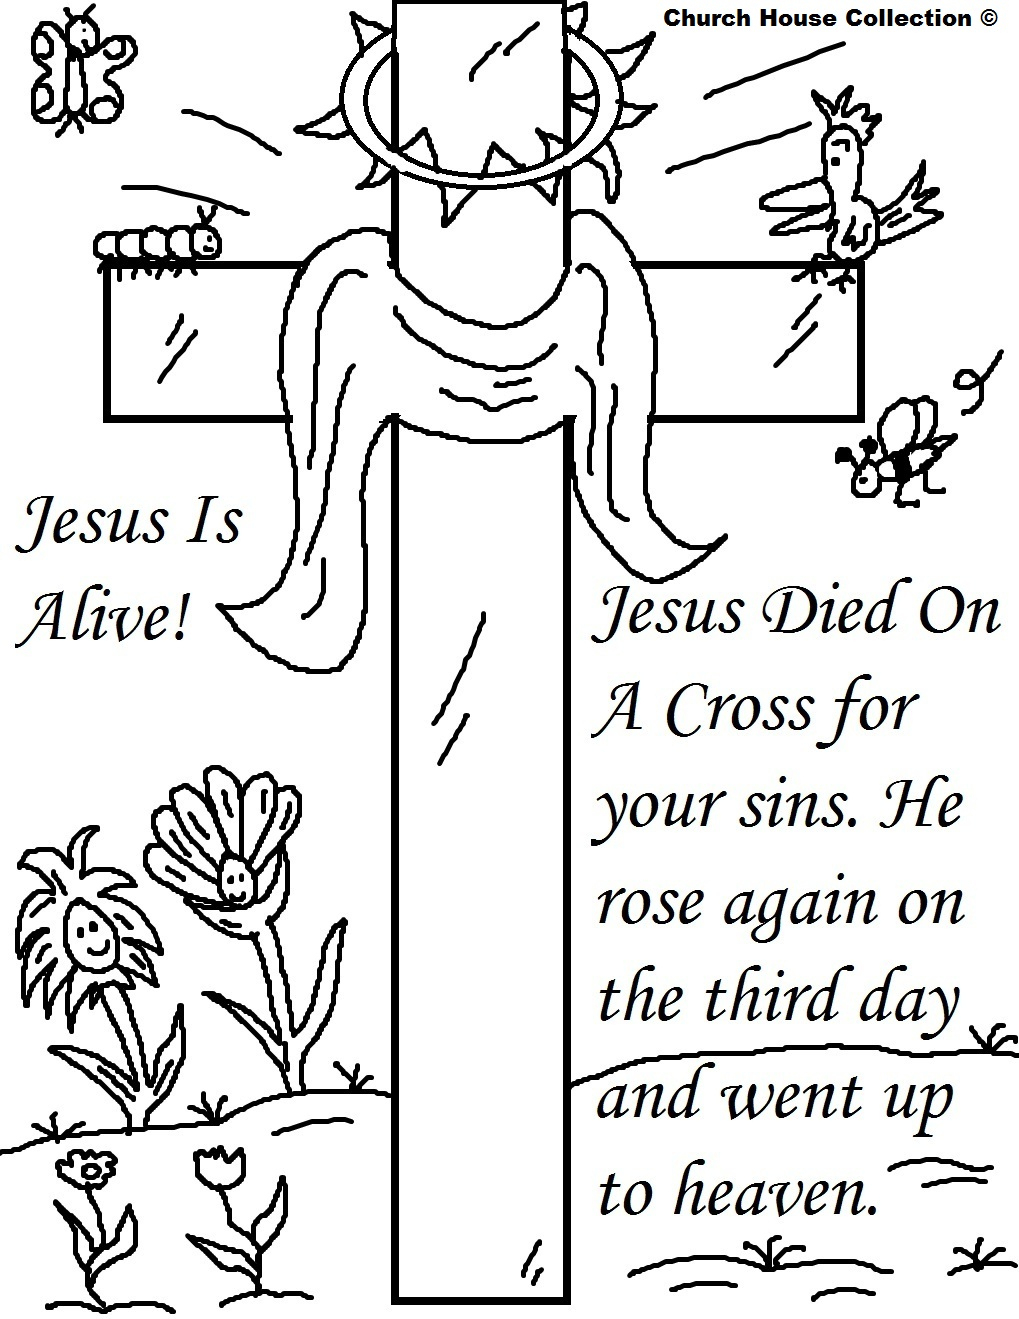 25 Religious Easter Coloring Pages | Free Easter Activity Printables - Free Easter Color Pages Printable